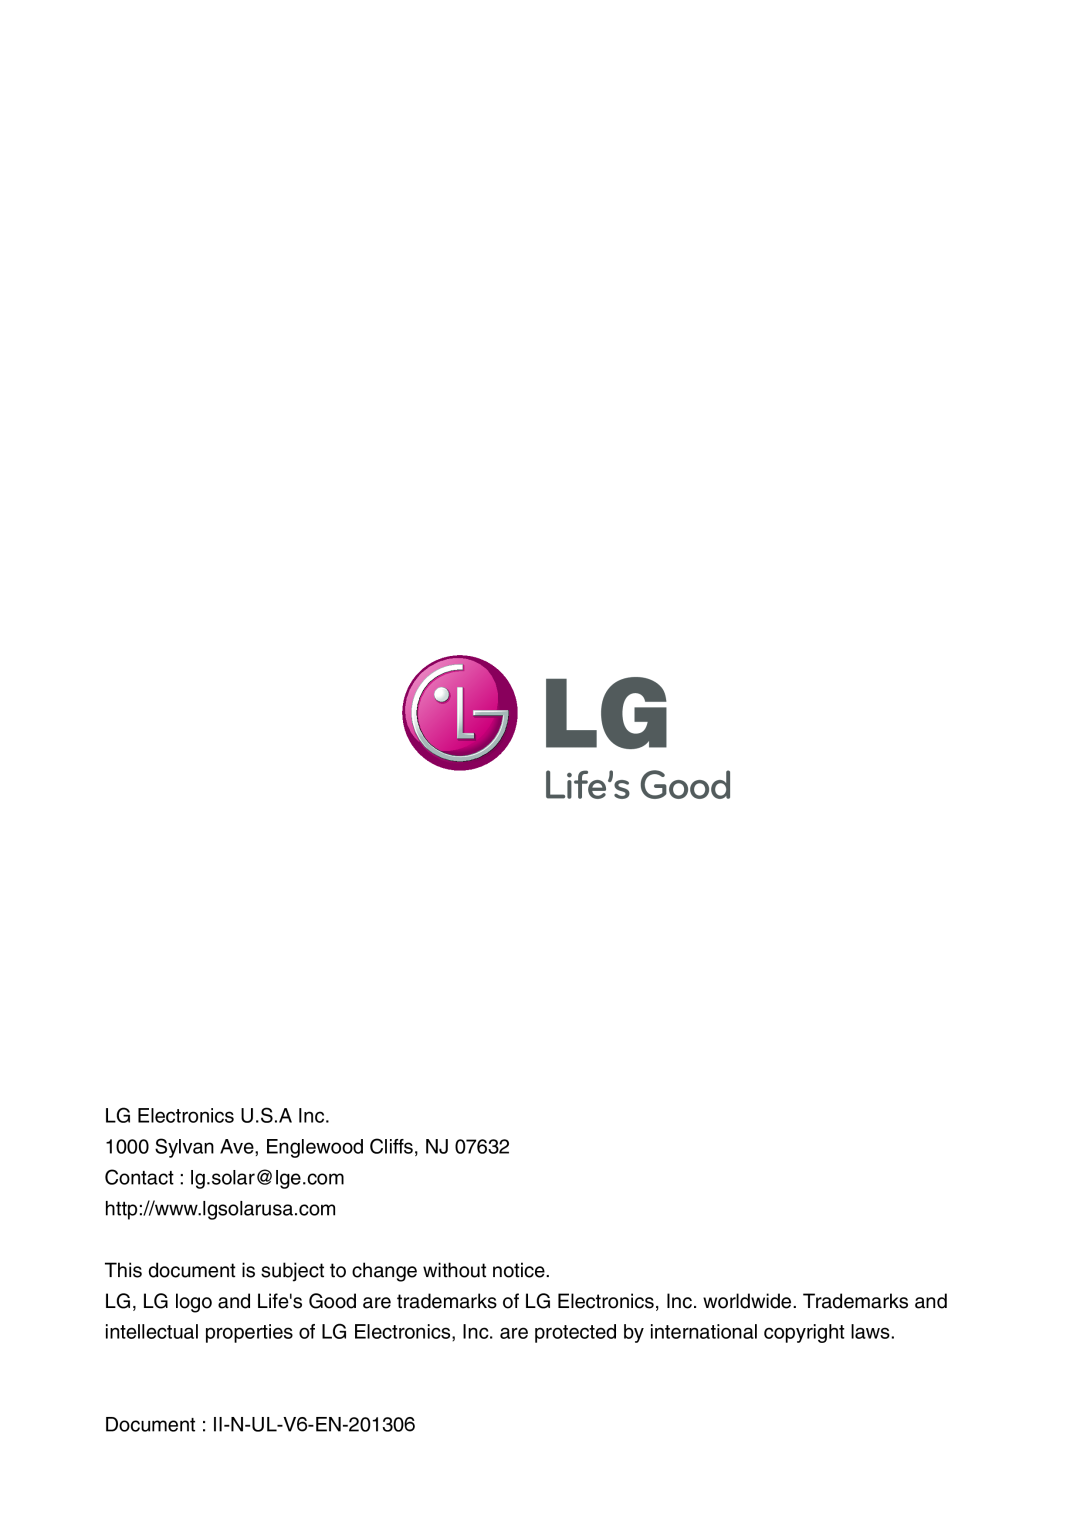 LG Electronics LGXXXN1C(W)-G3 LG Electronics U.S.A Inc, This document is subject to change without notice 